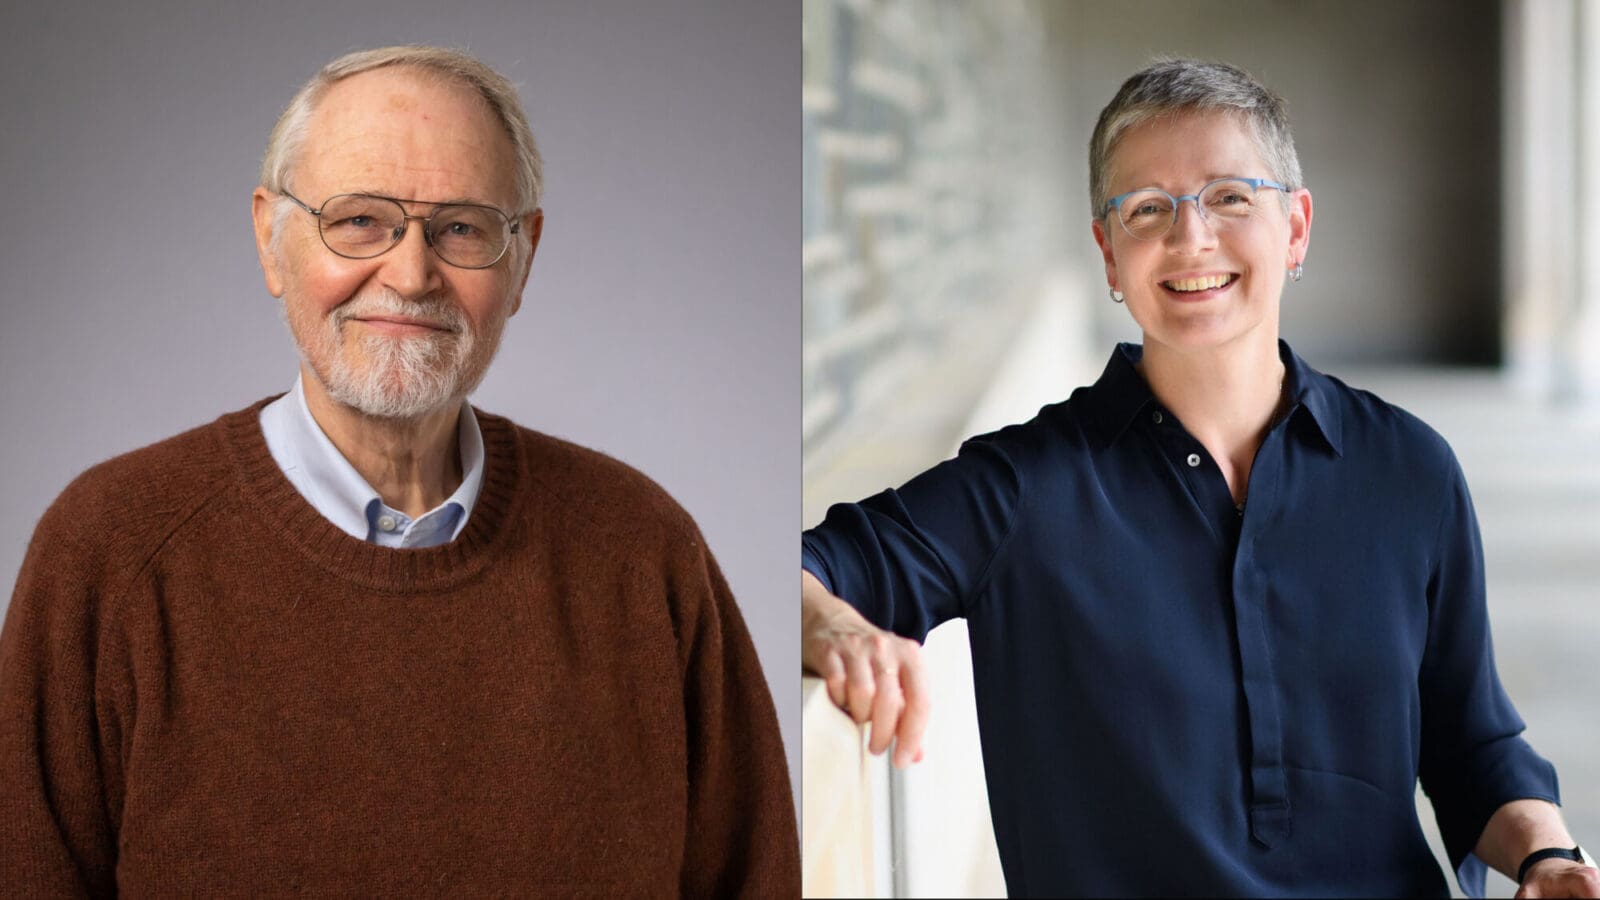 Brian Kernighan, left, and Claire Gmachl, right